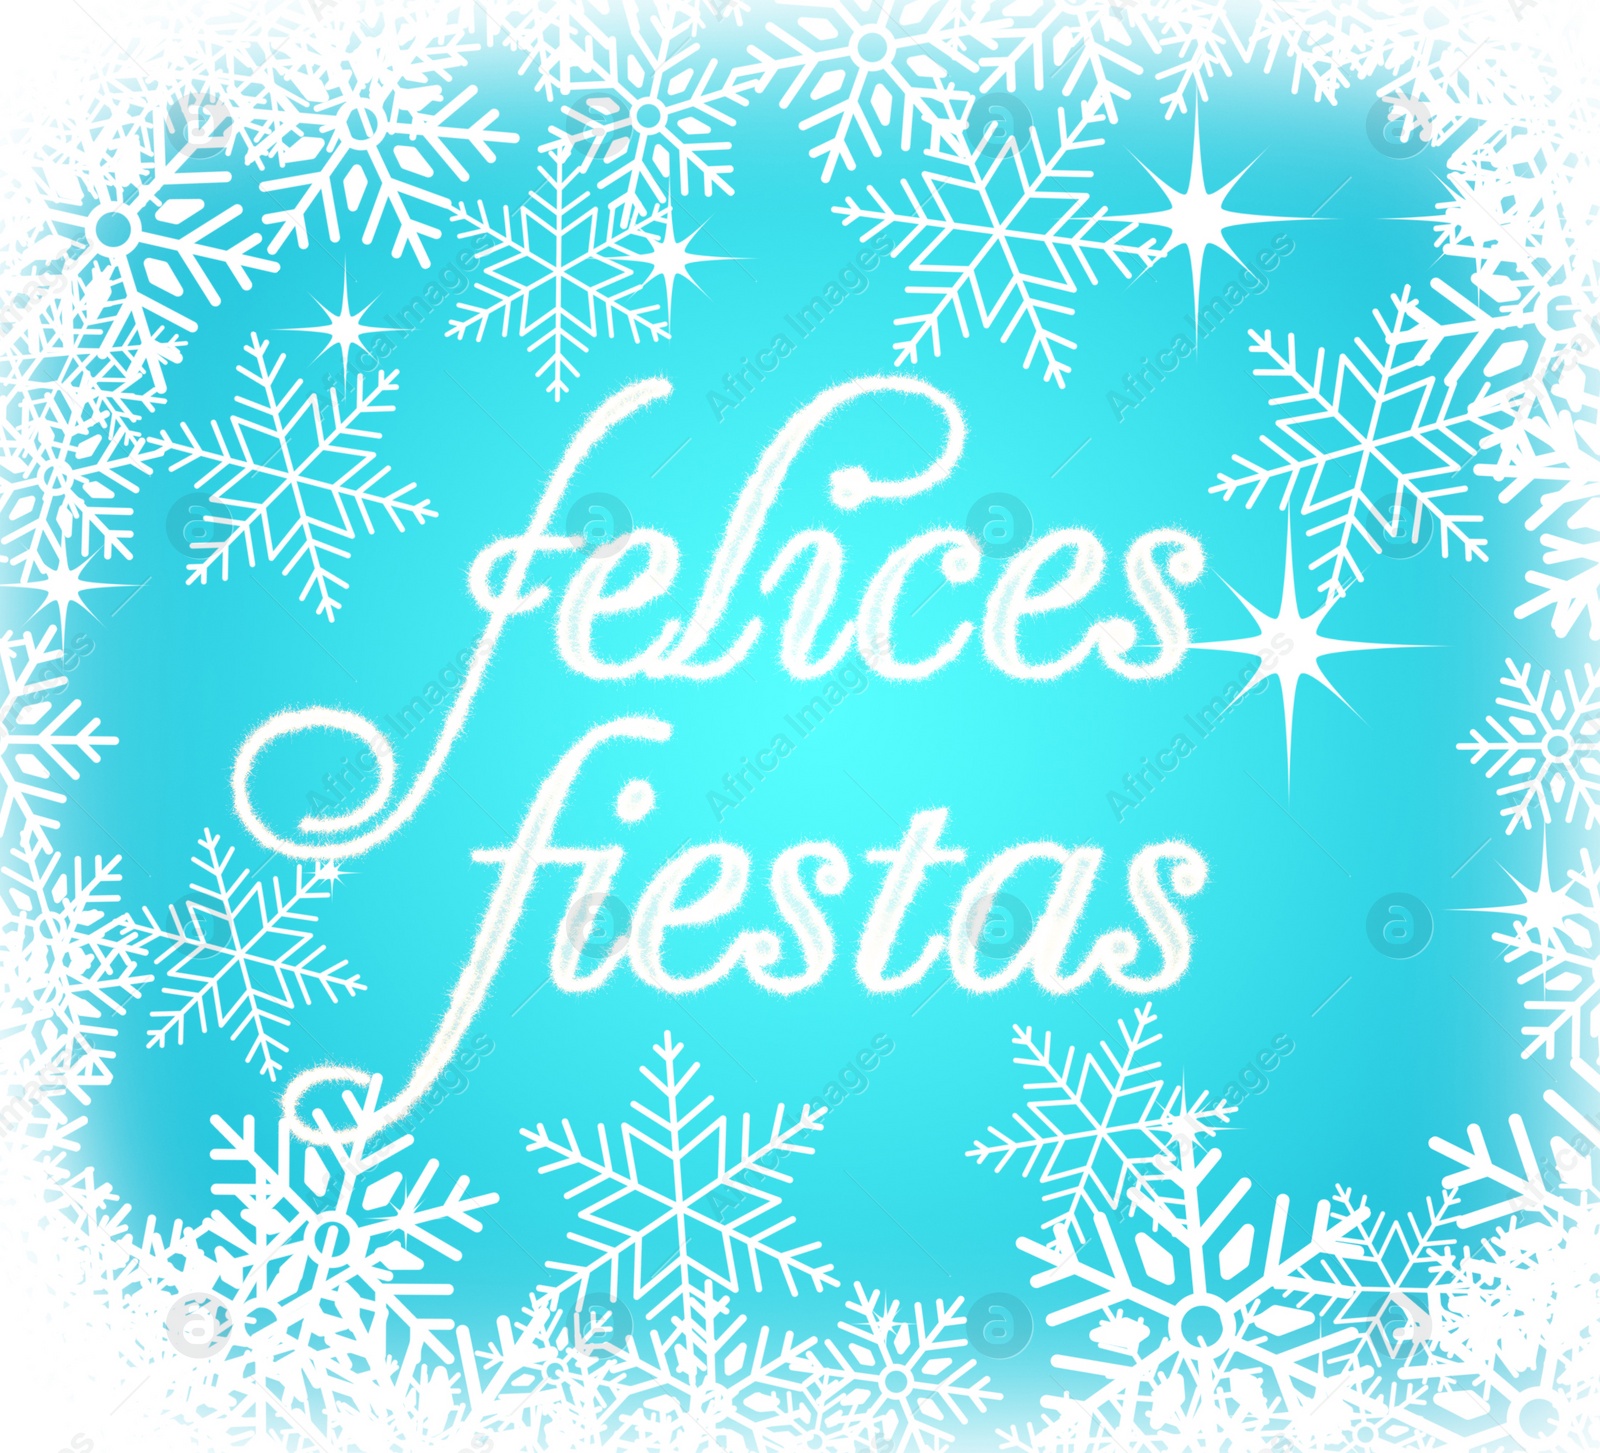 Illustration of Felices Fiestas. Festive greeting card with happy holiday's wishes in Spanish and snowflakes on light blue background